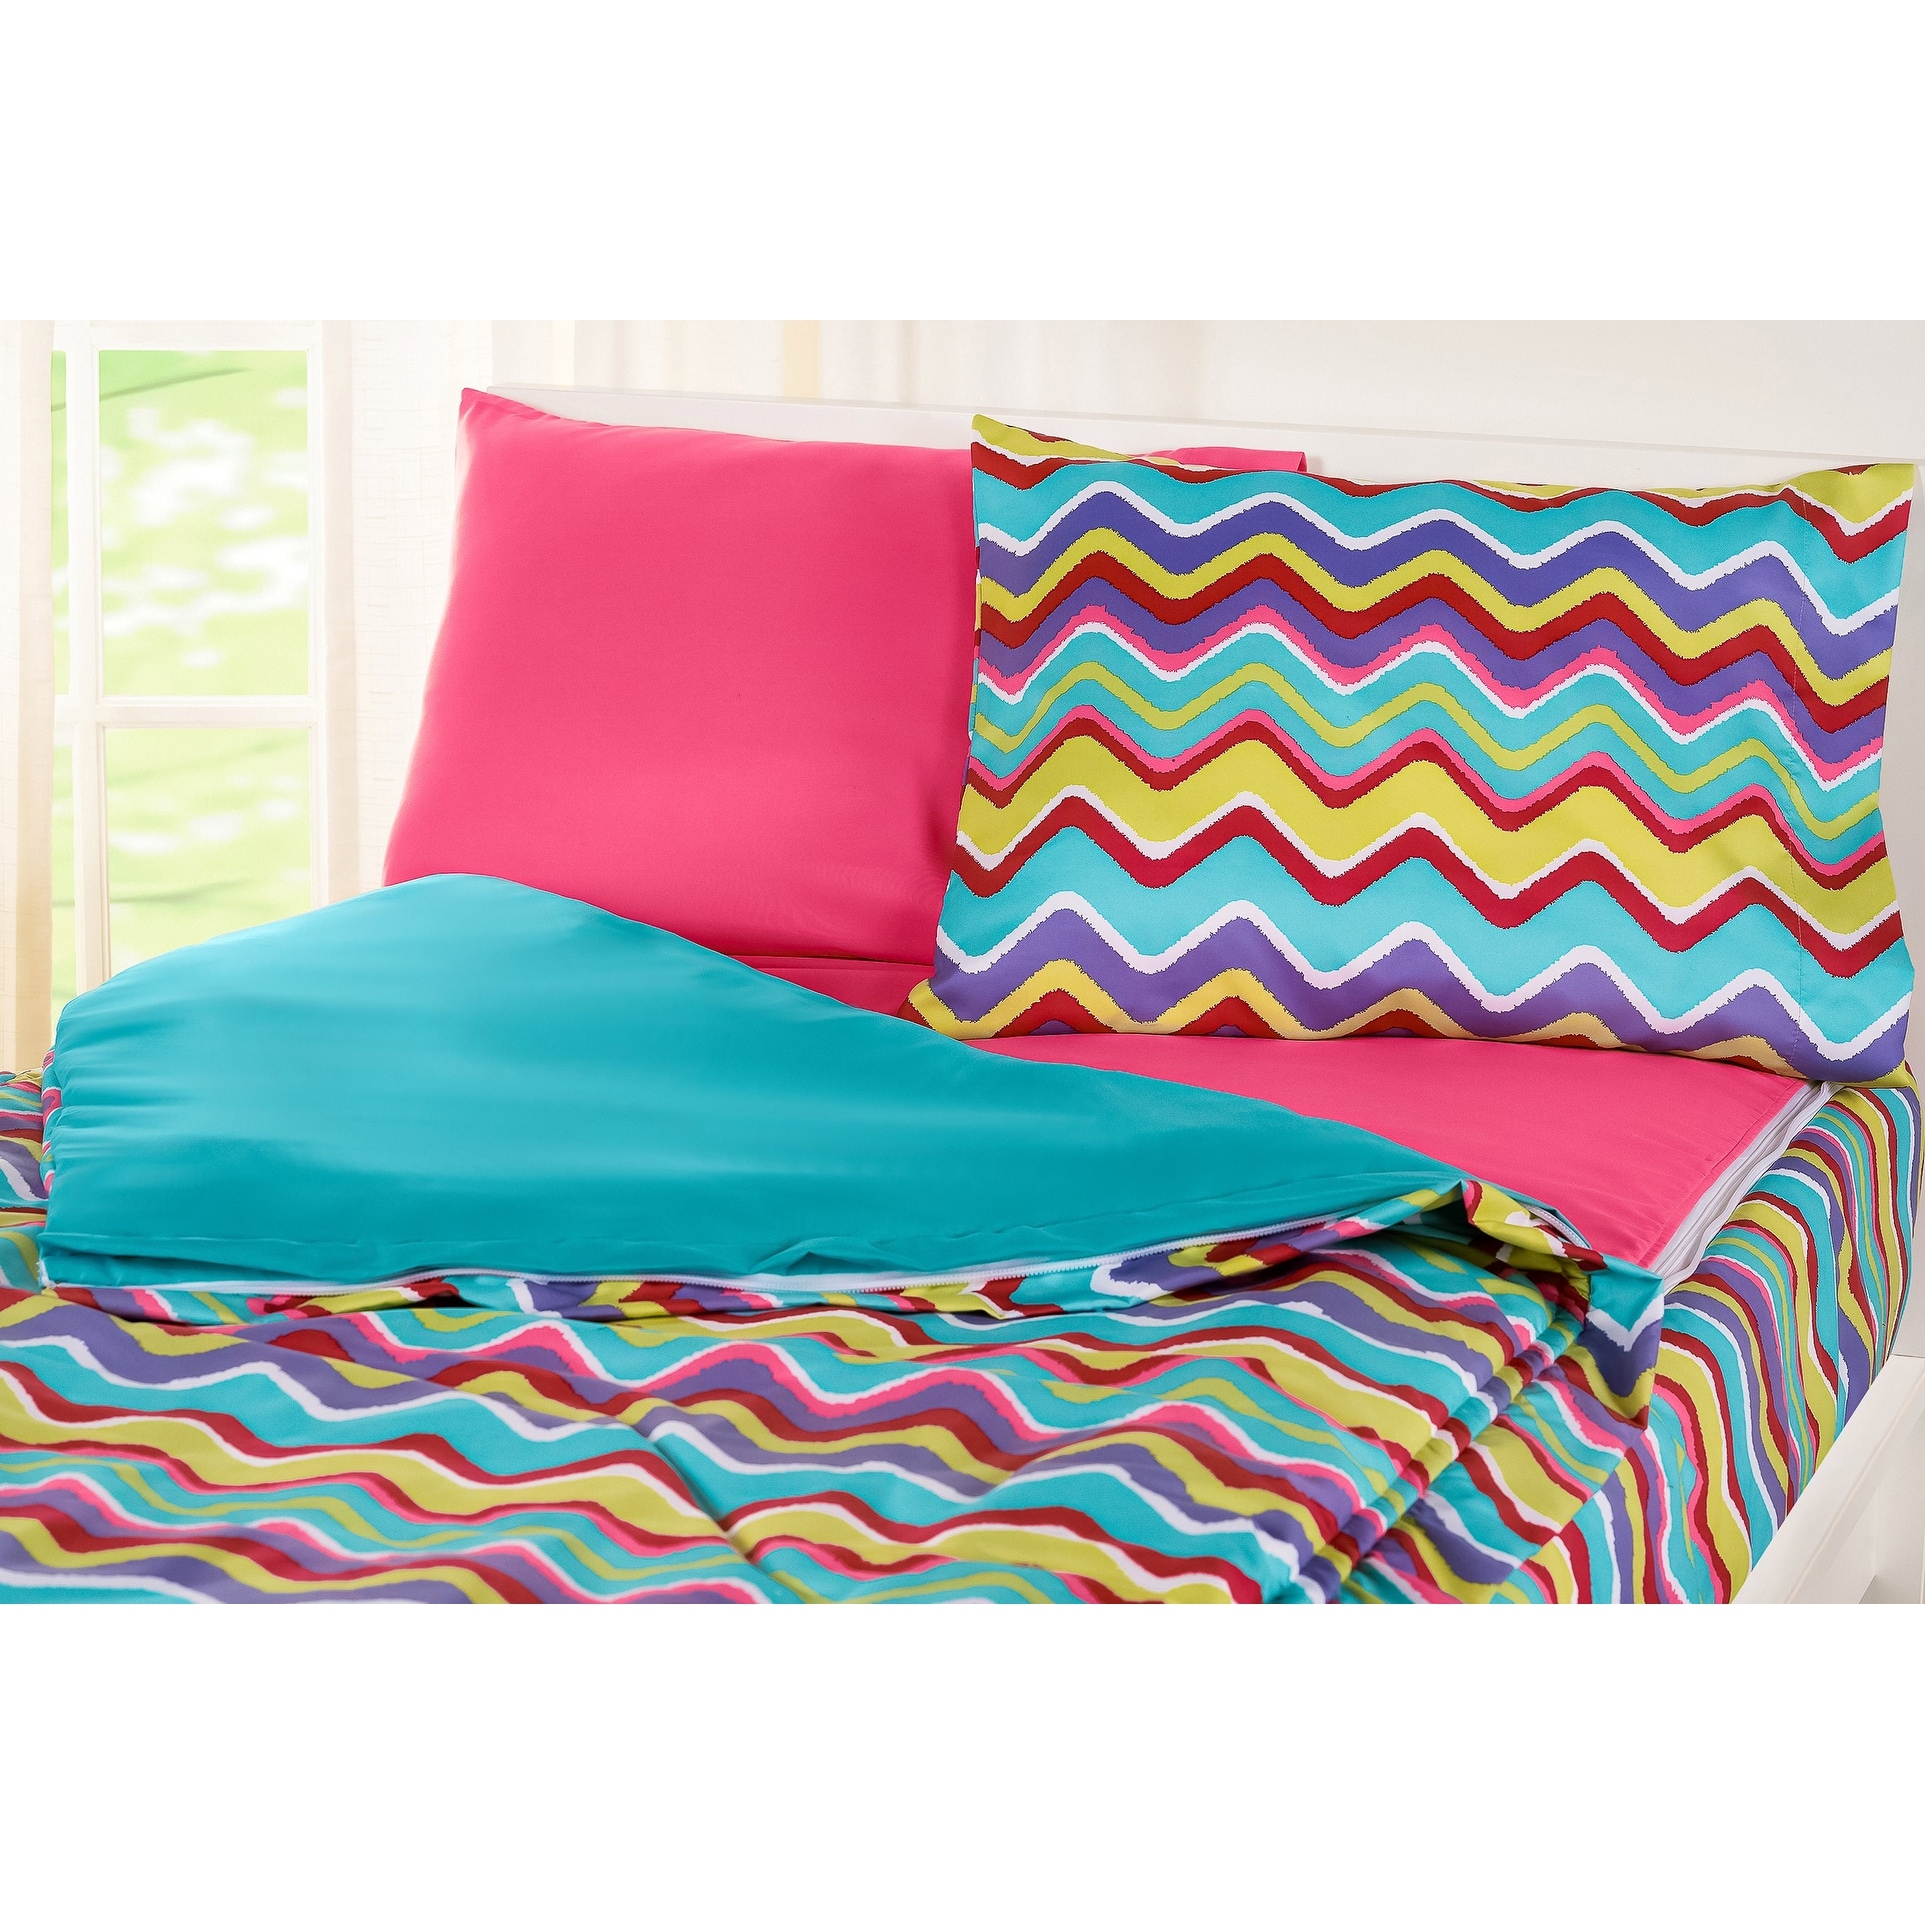 https://ak1.ostkcdn.com/images/products/is/images/direct/5f617fbb102c546a5bfddcf322016177a352fe62/Siscovers-Color-Palette-Bunkie-Deluxe-Zipper-Bedding-Set.jpg